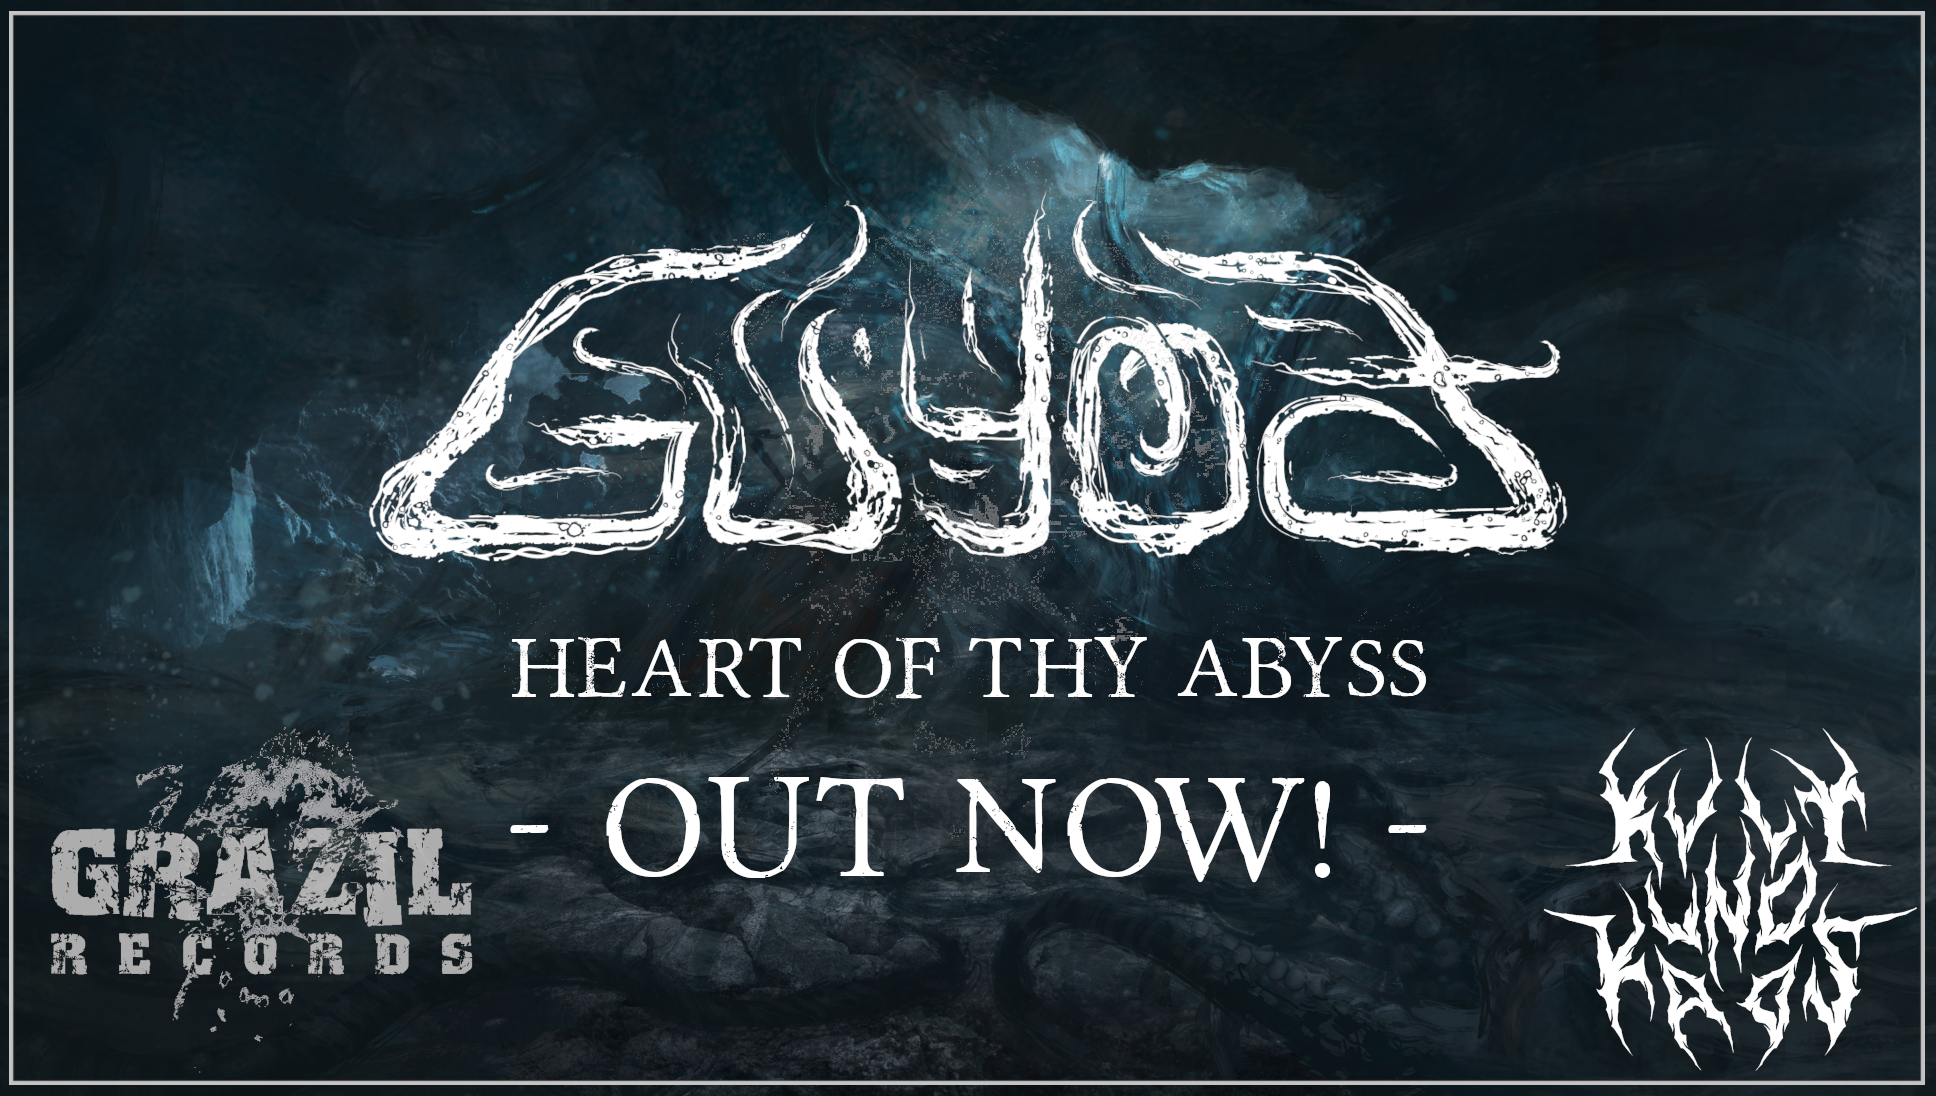 Guyod Heart Of Thy Abyss grazil Records Kvlt und Kaos Productions